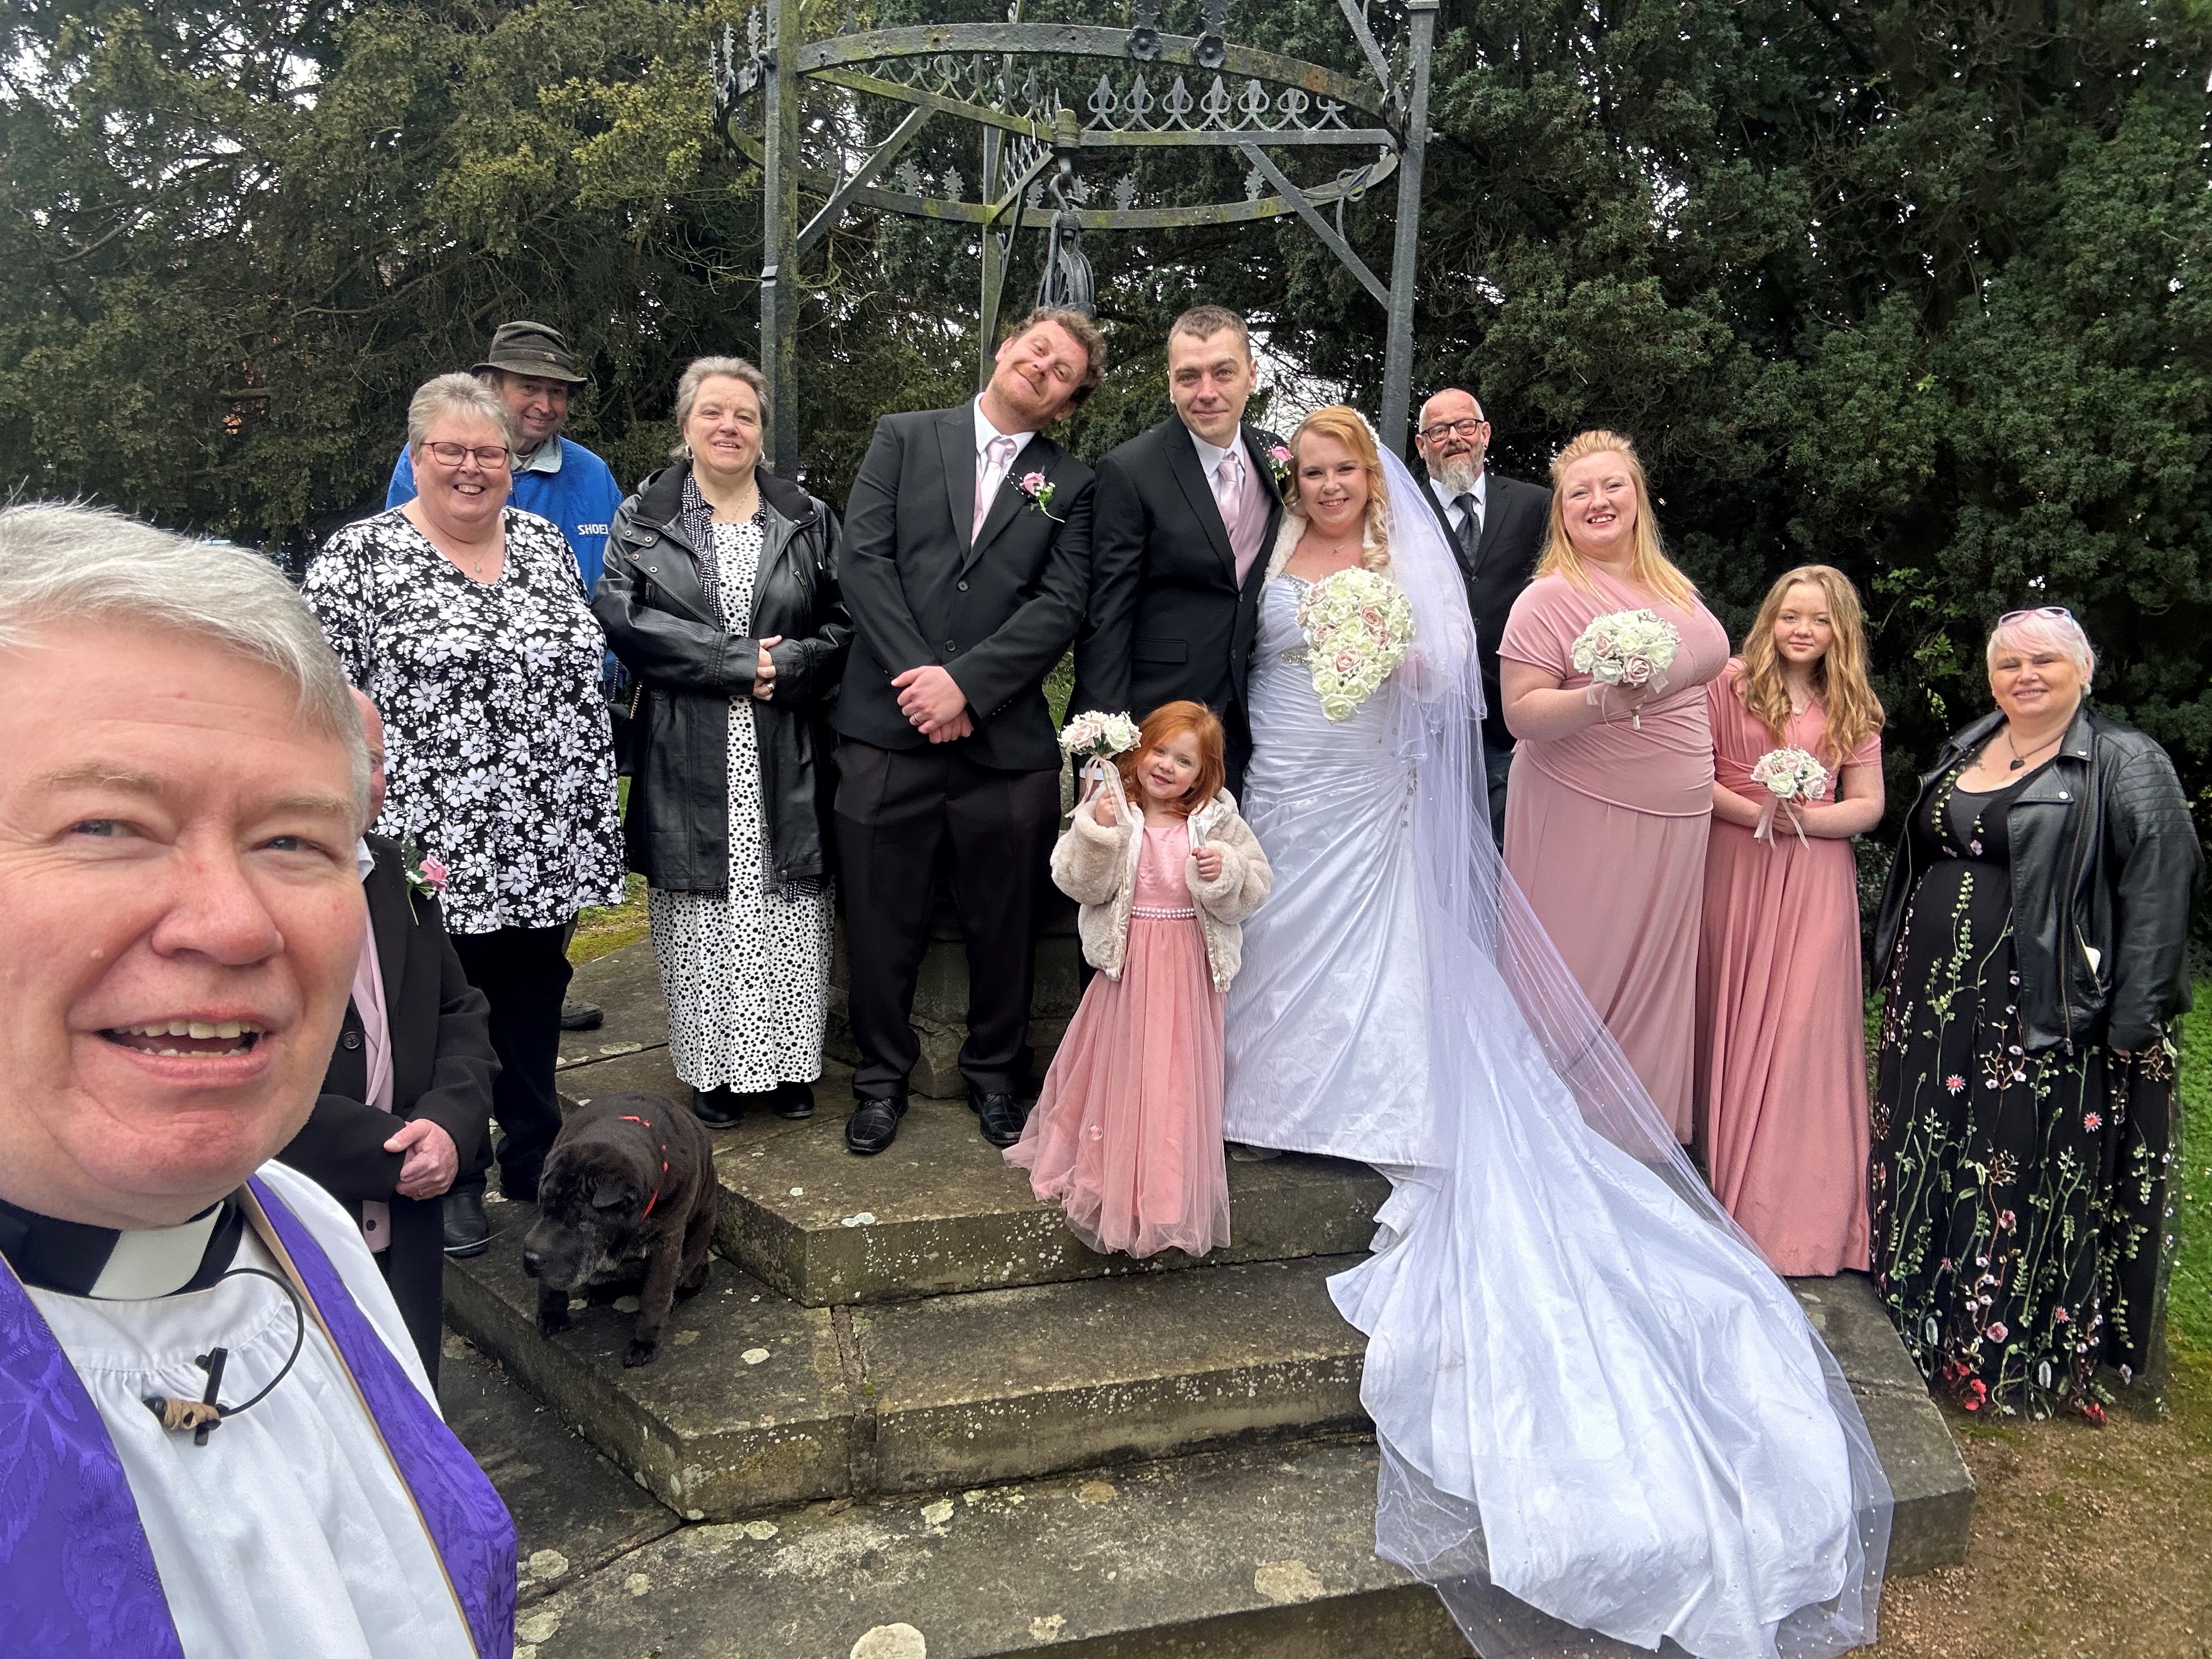 Vicar Gary Crellin takes a photo with the wedding party outside the church